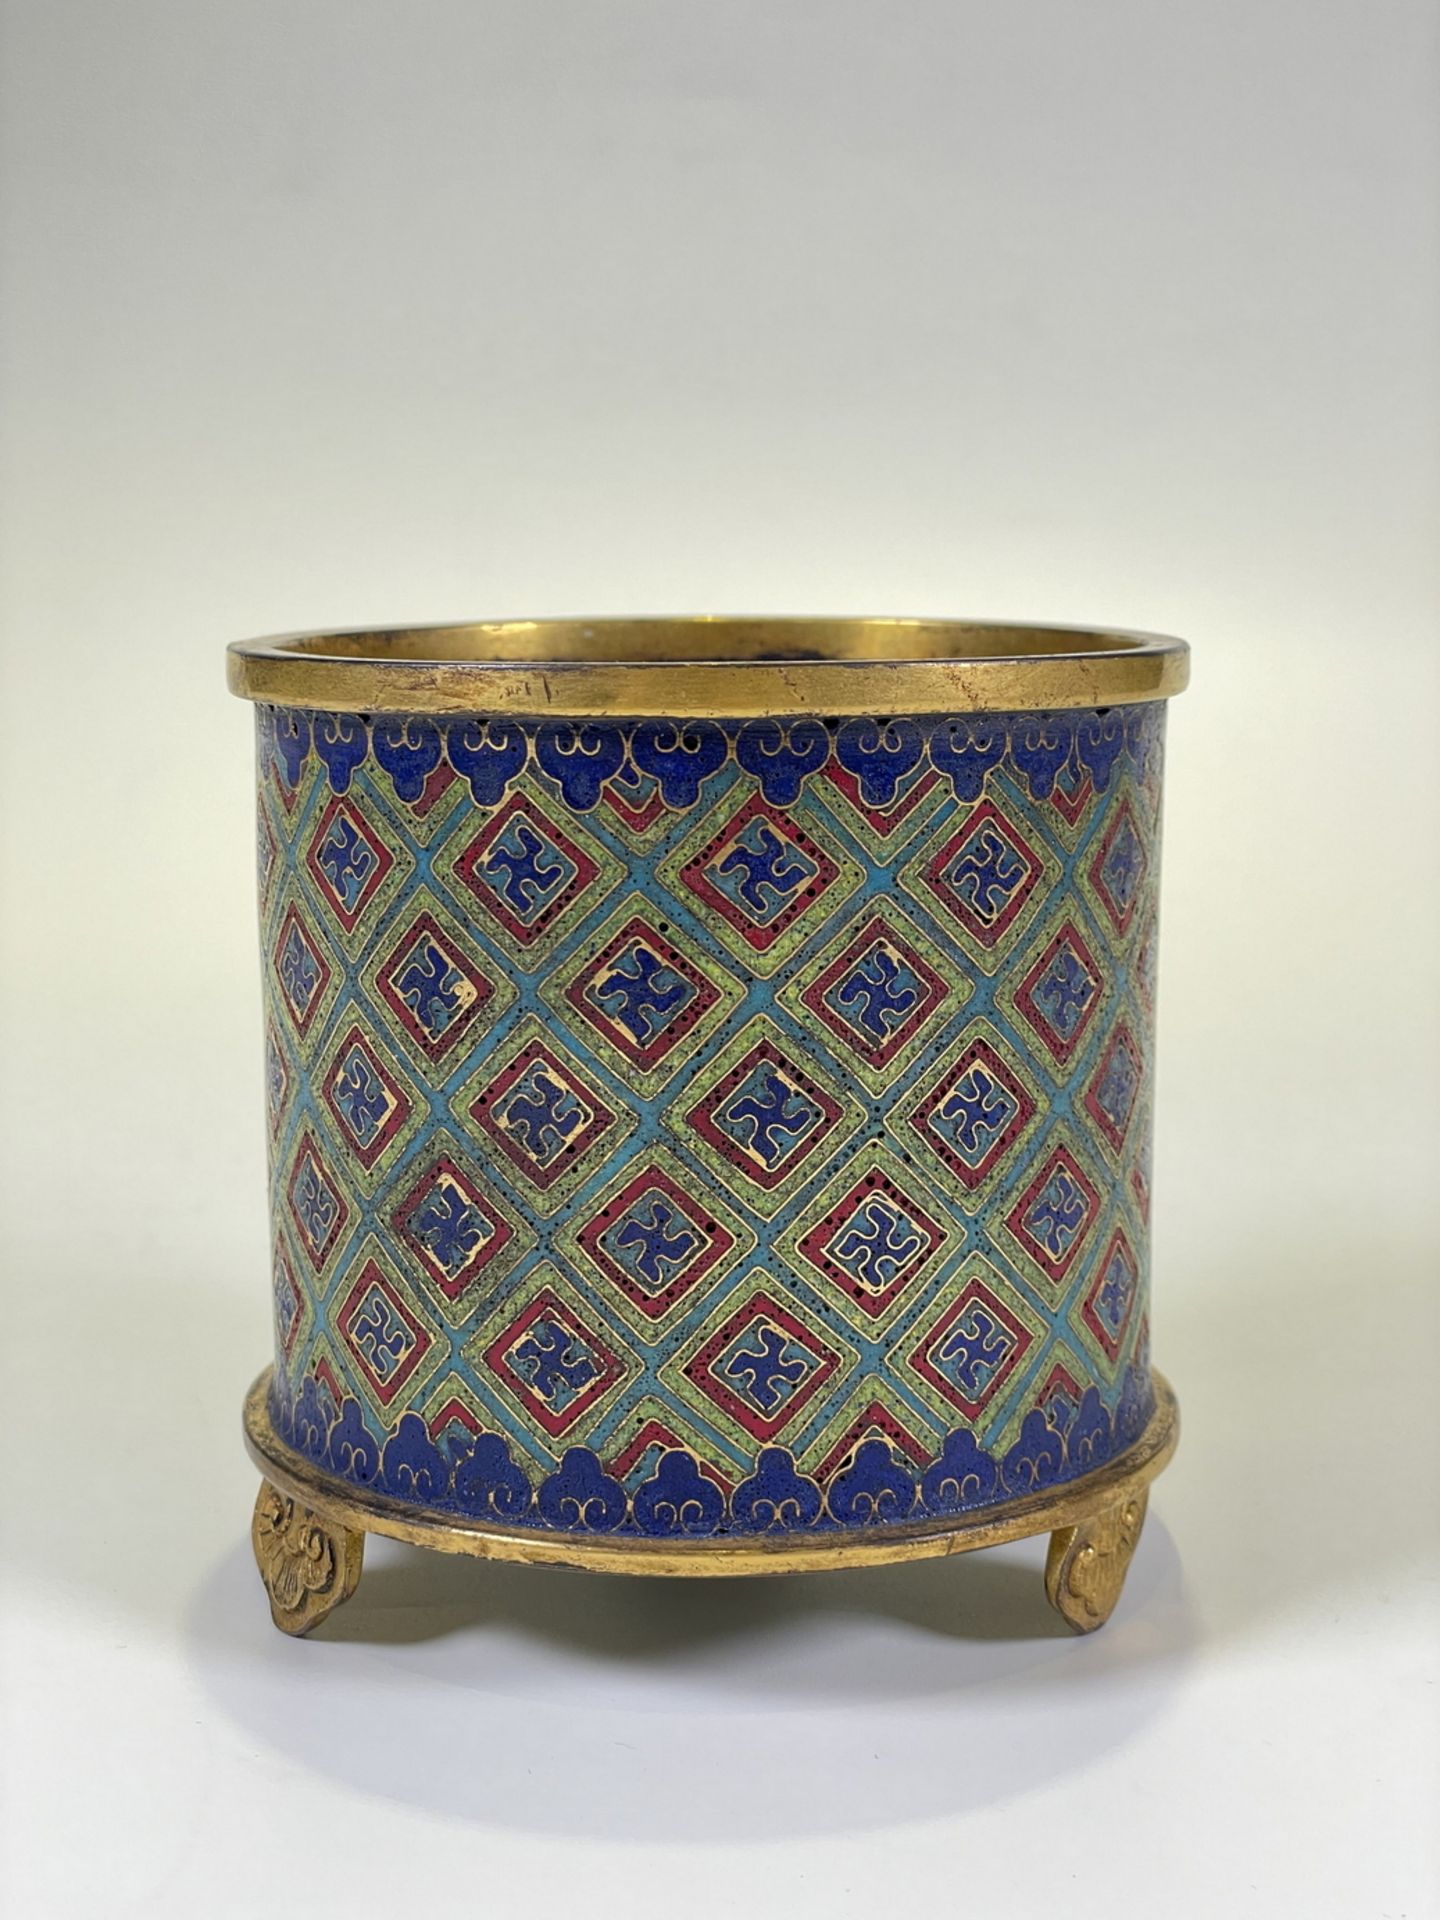 FINE CHINESE CLOISONNE, 18TH/19TH Century Pr. Collection of NARA private gallary. 